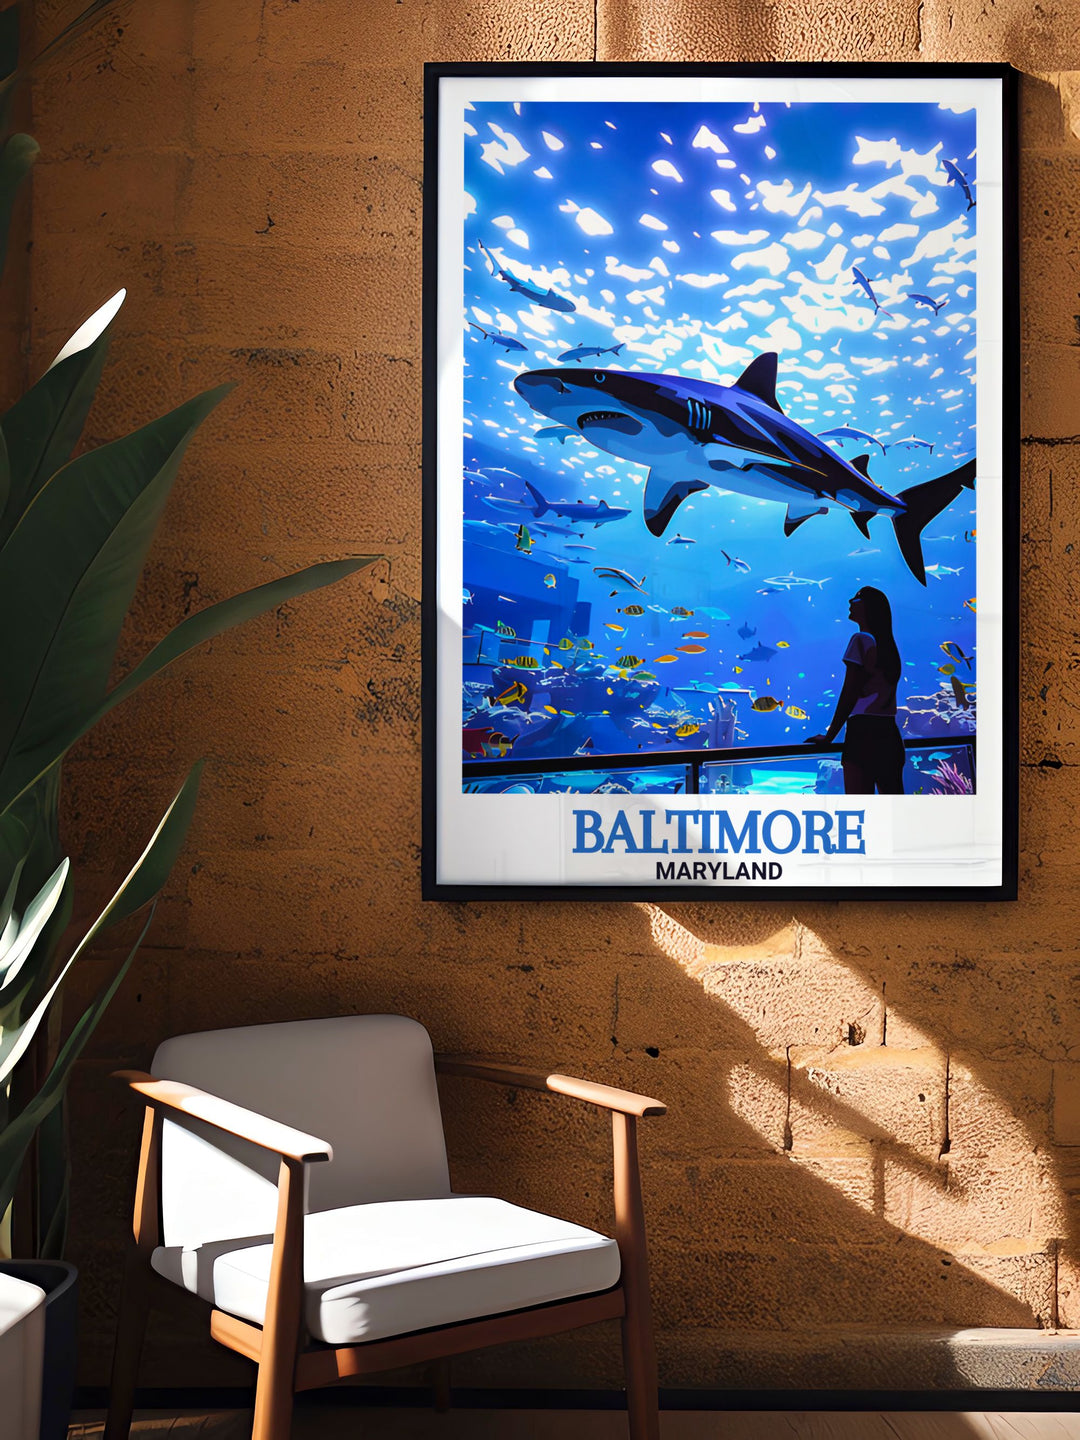 Captivating National Aquarium poster featuring an intricately detailed map of Baltimore an ideal wall art piece that brings urban elegance to your home decor and serves as a beautiful reminder of the citys vibrant culture